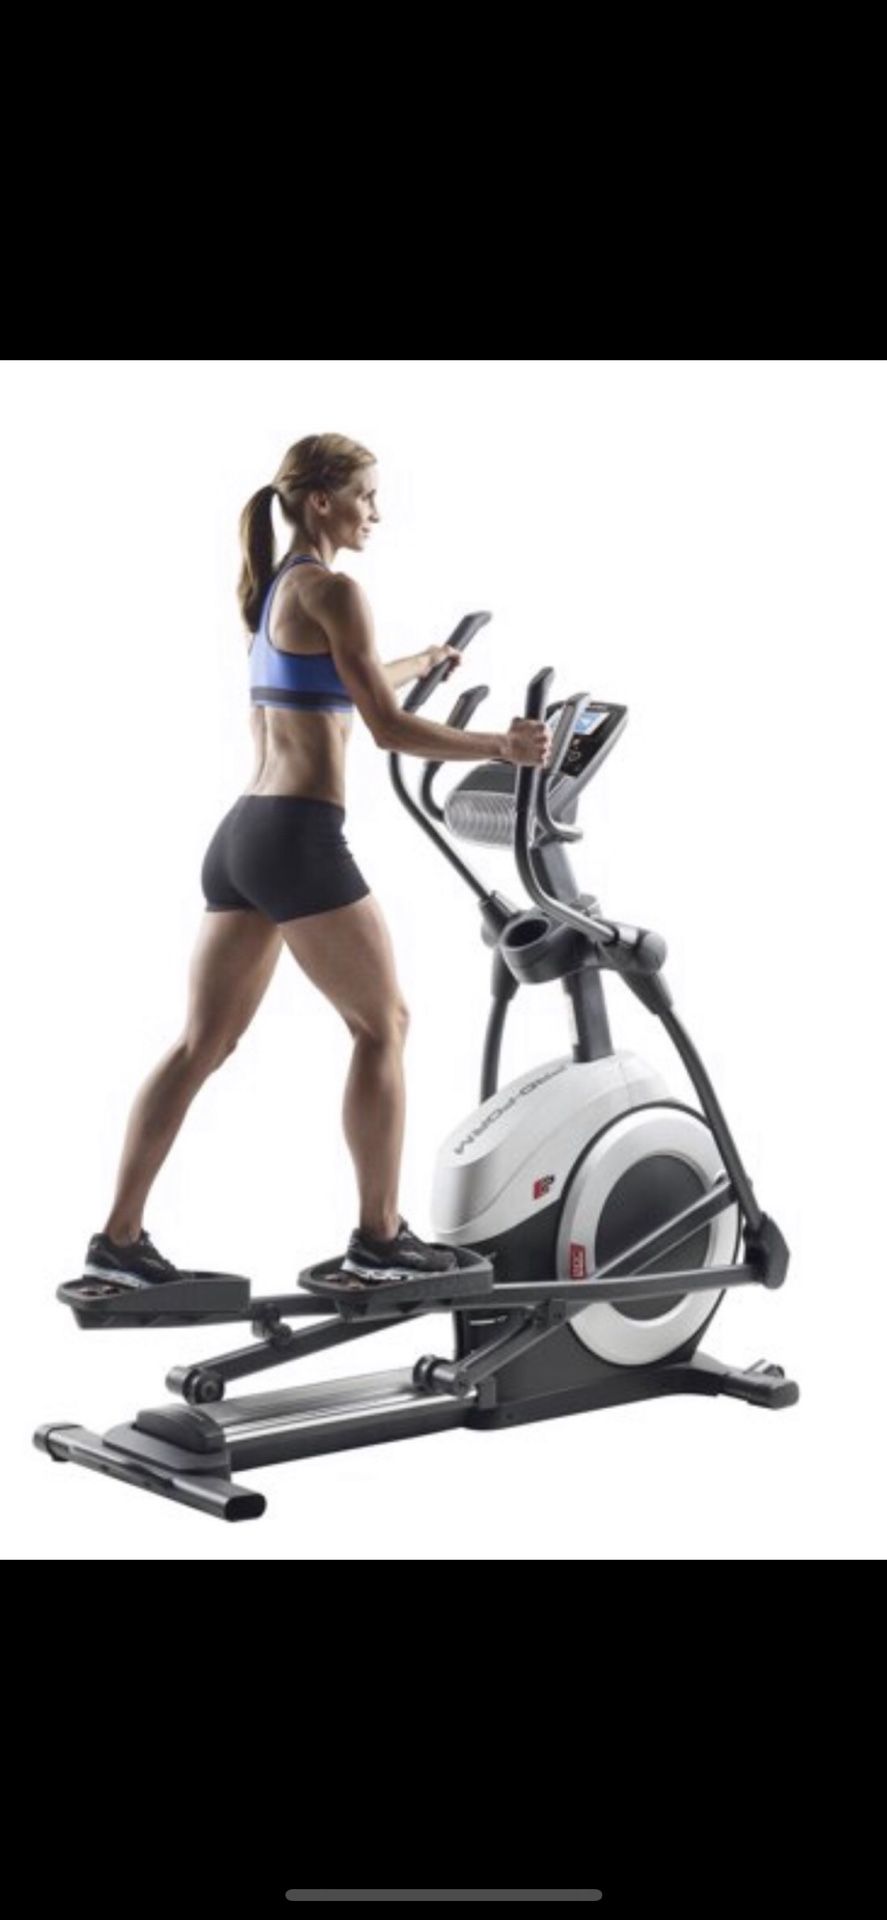 Pro form 6.0 ET Elliptical firm will not respond to offers